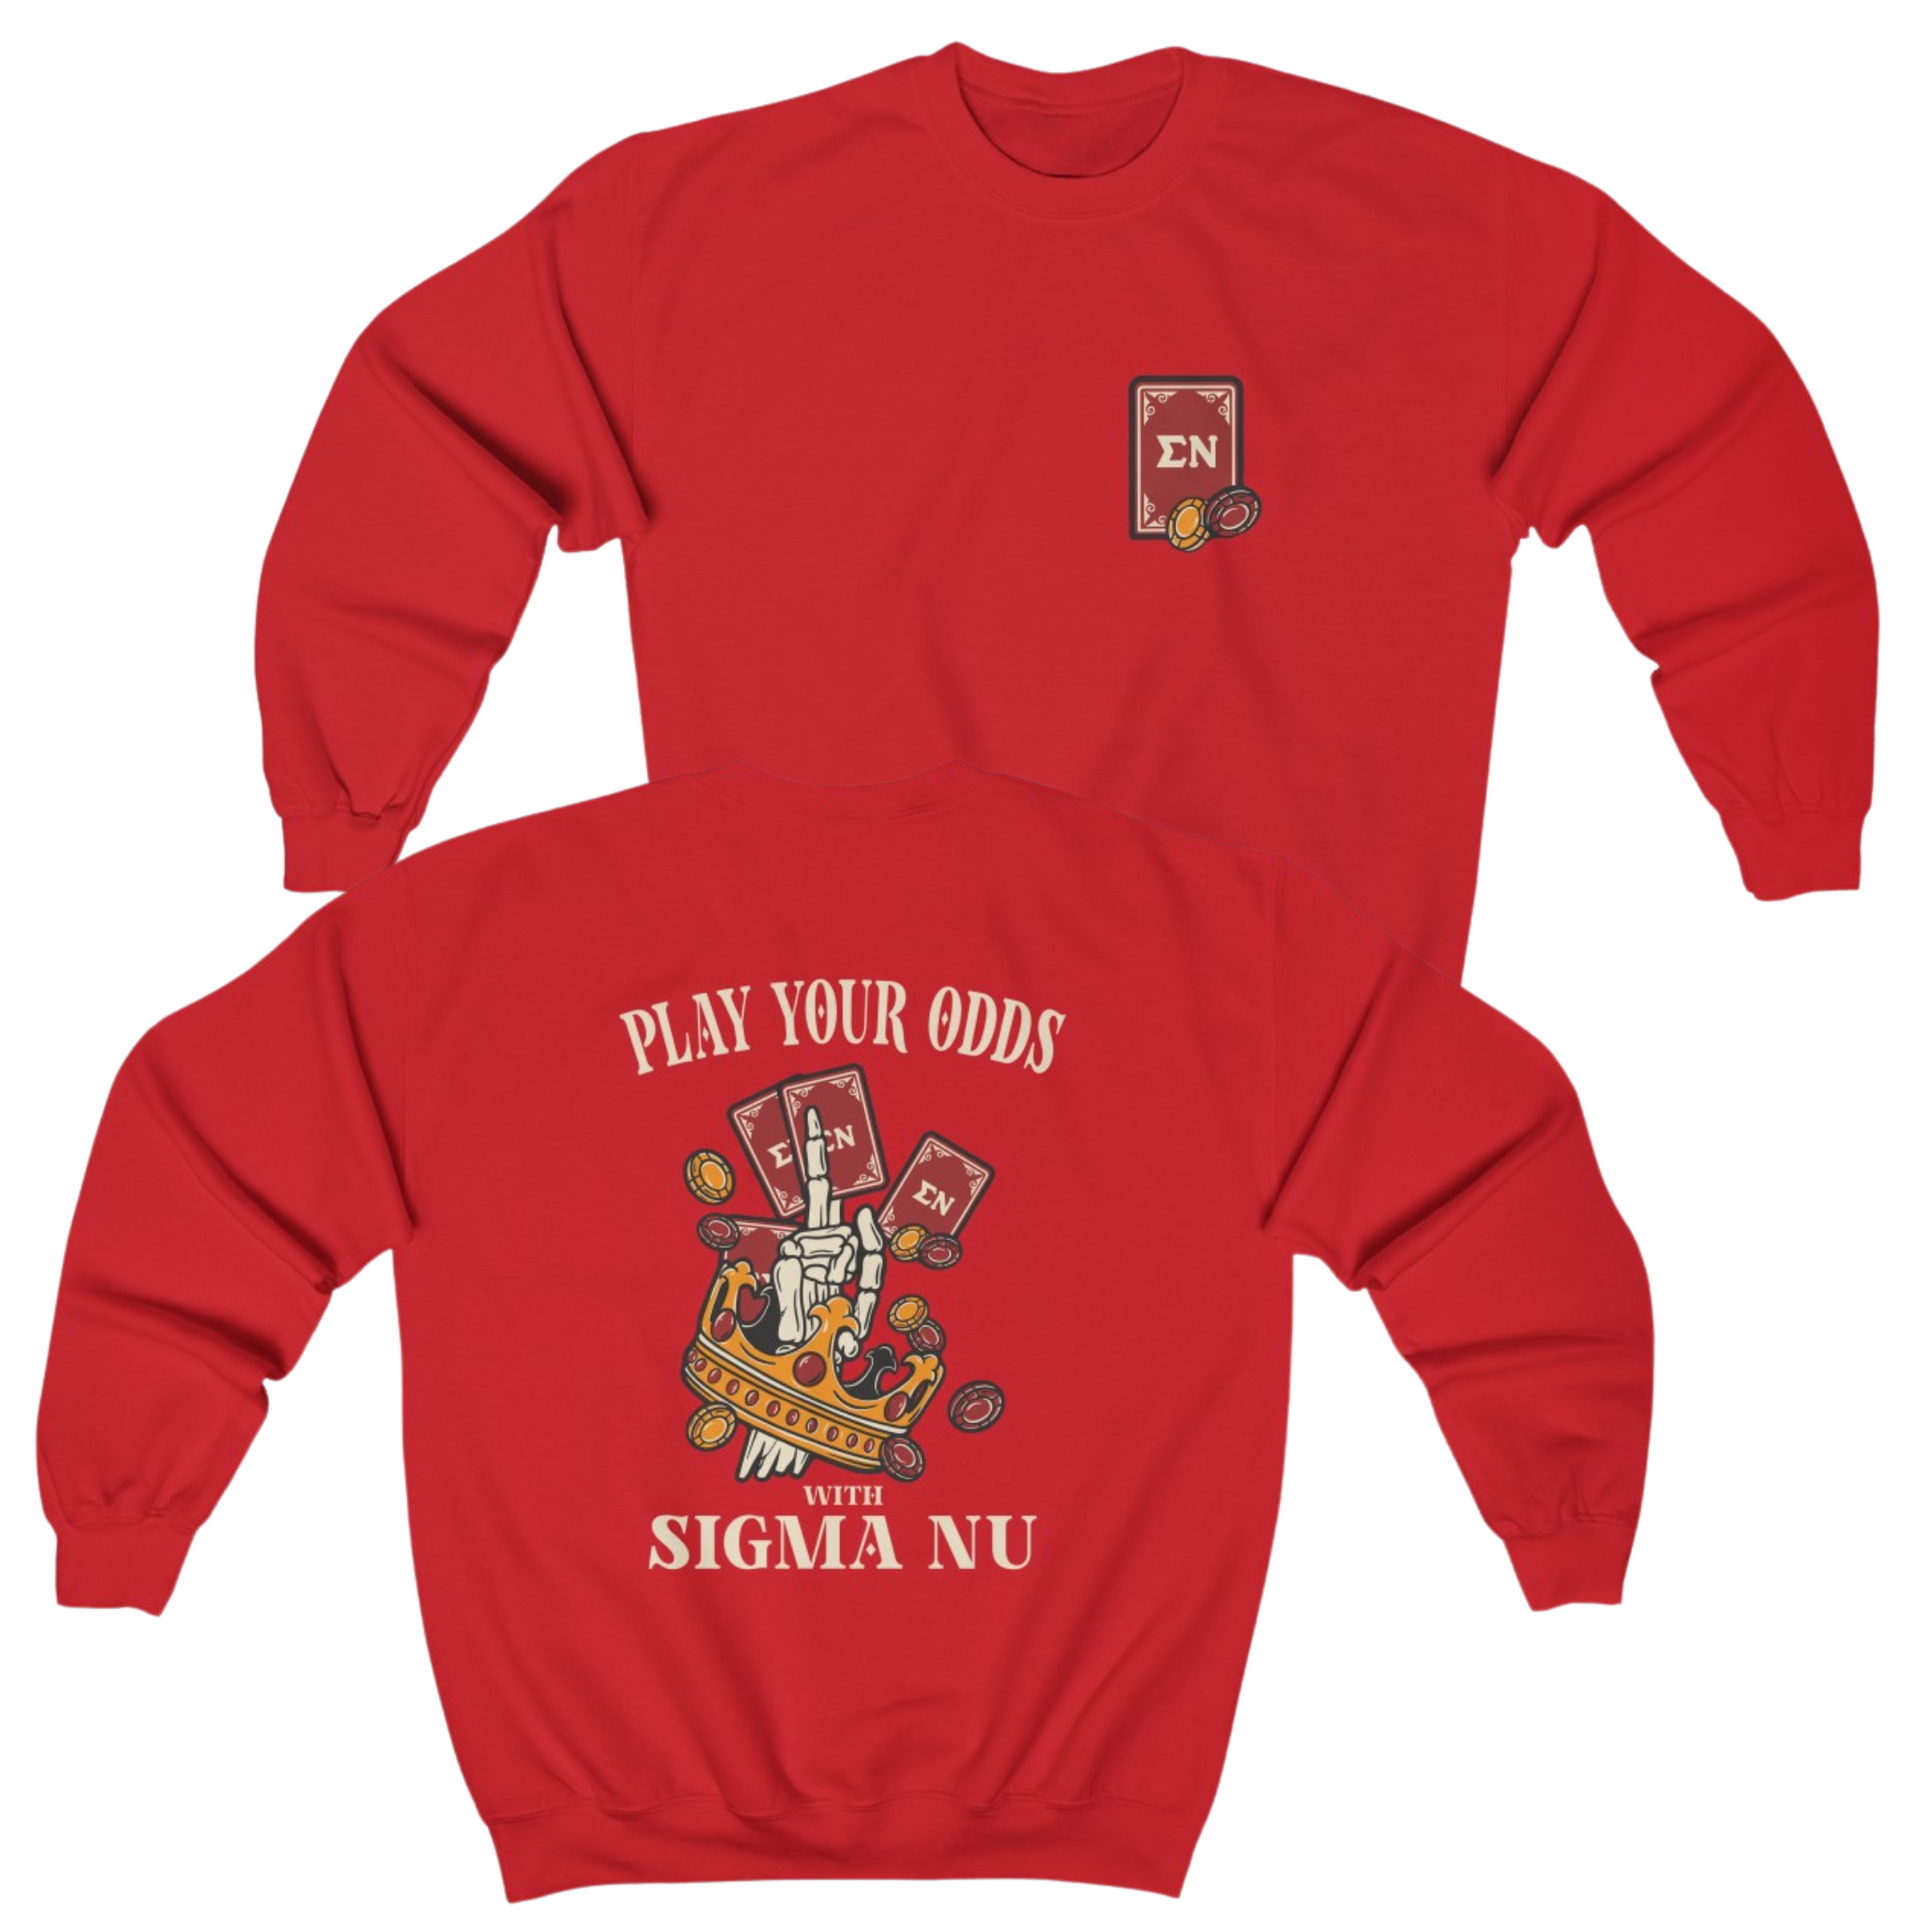 Red Sigma Nu Graphic Crewneck Sweatshirt | Play Your Odds | Sigma Nu Clothing, Apparel and Merchandise